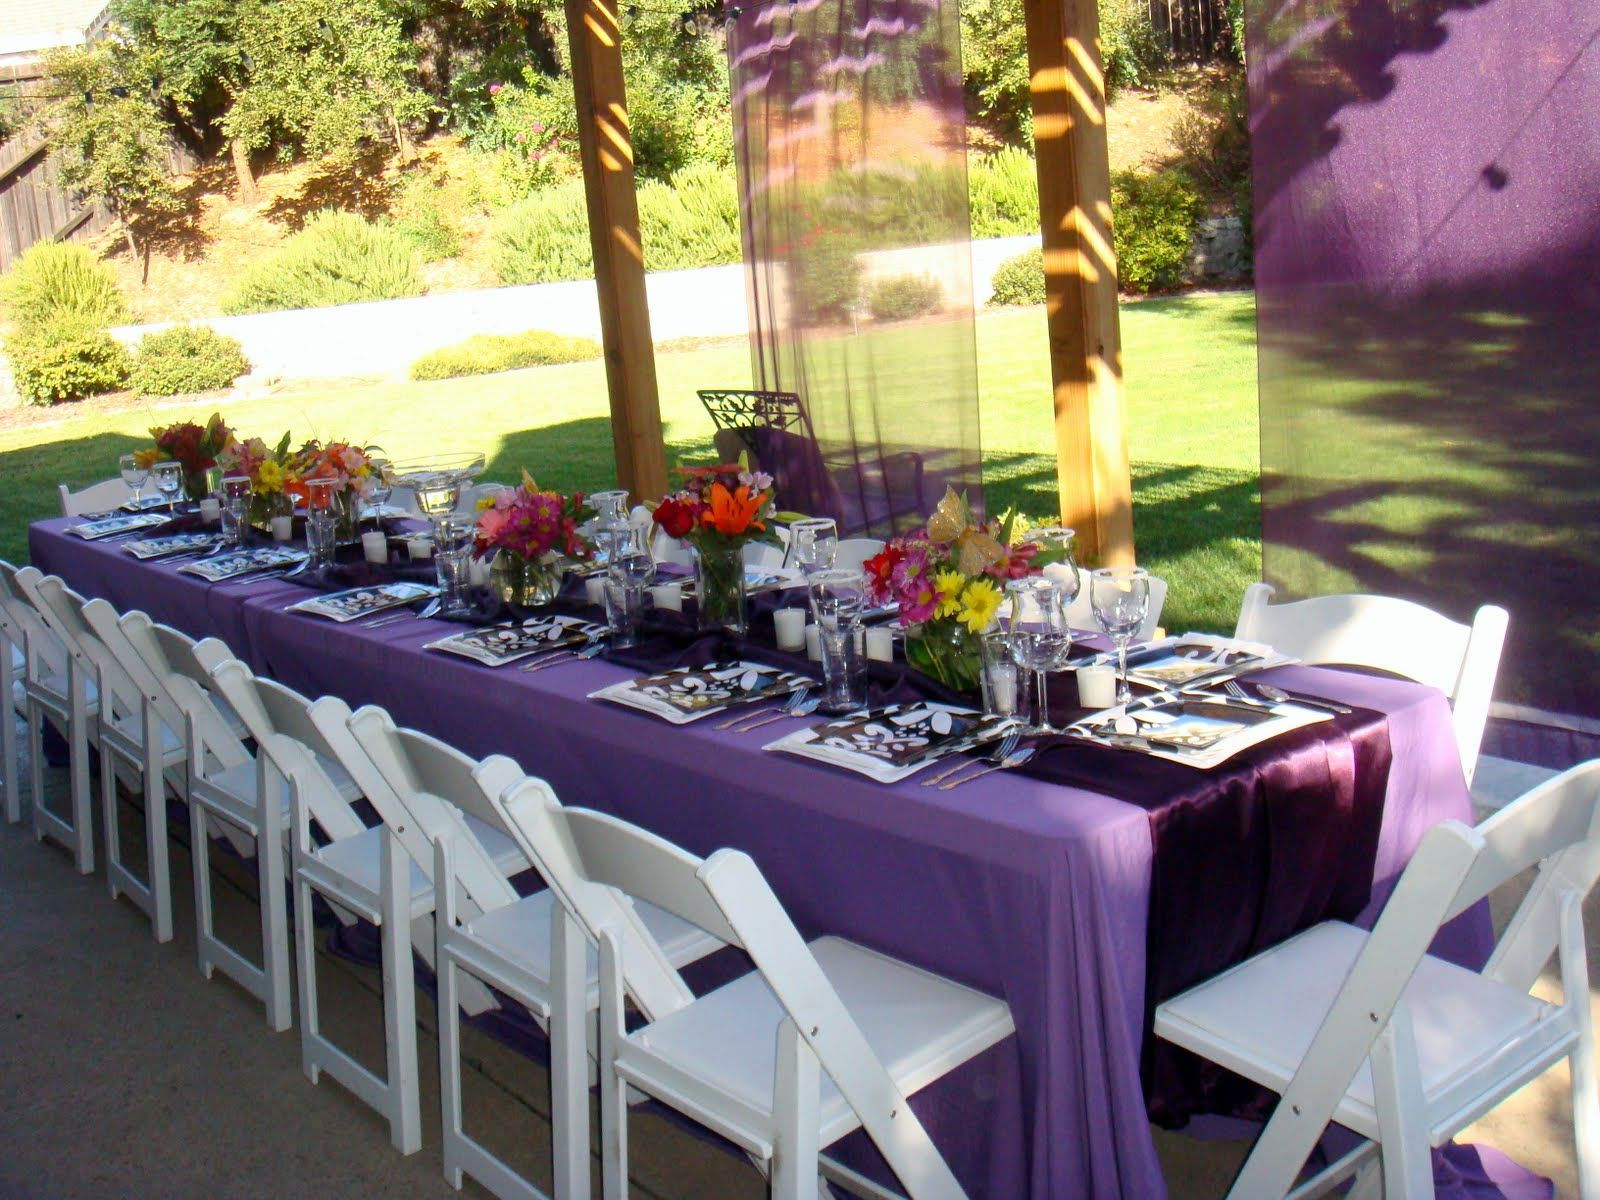 Free High School Graduation Backyard Party Ideas
 tablescapes for outdoor graduation party